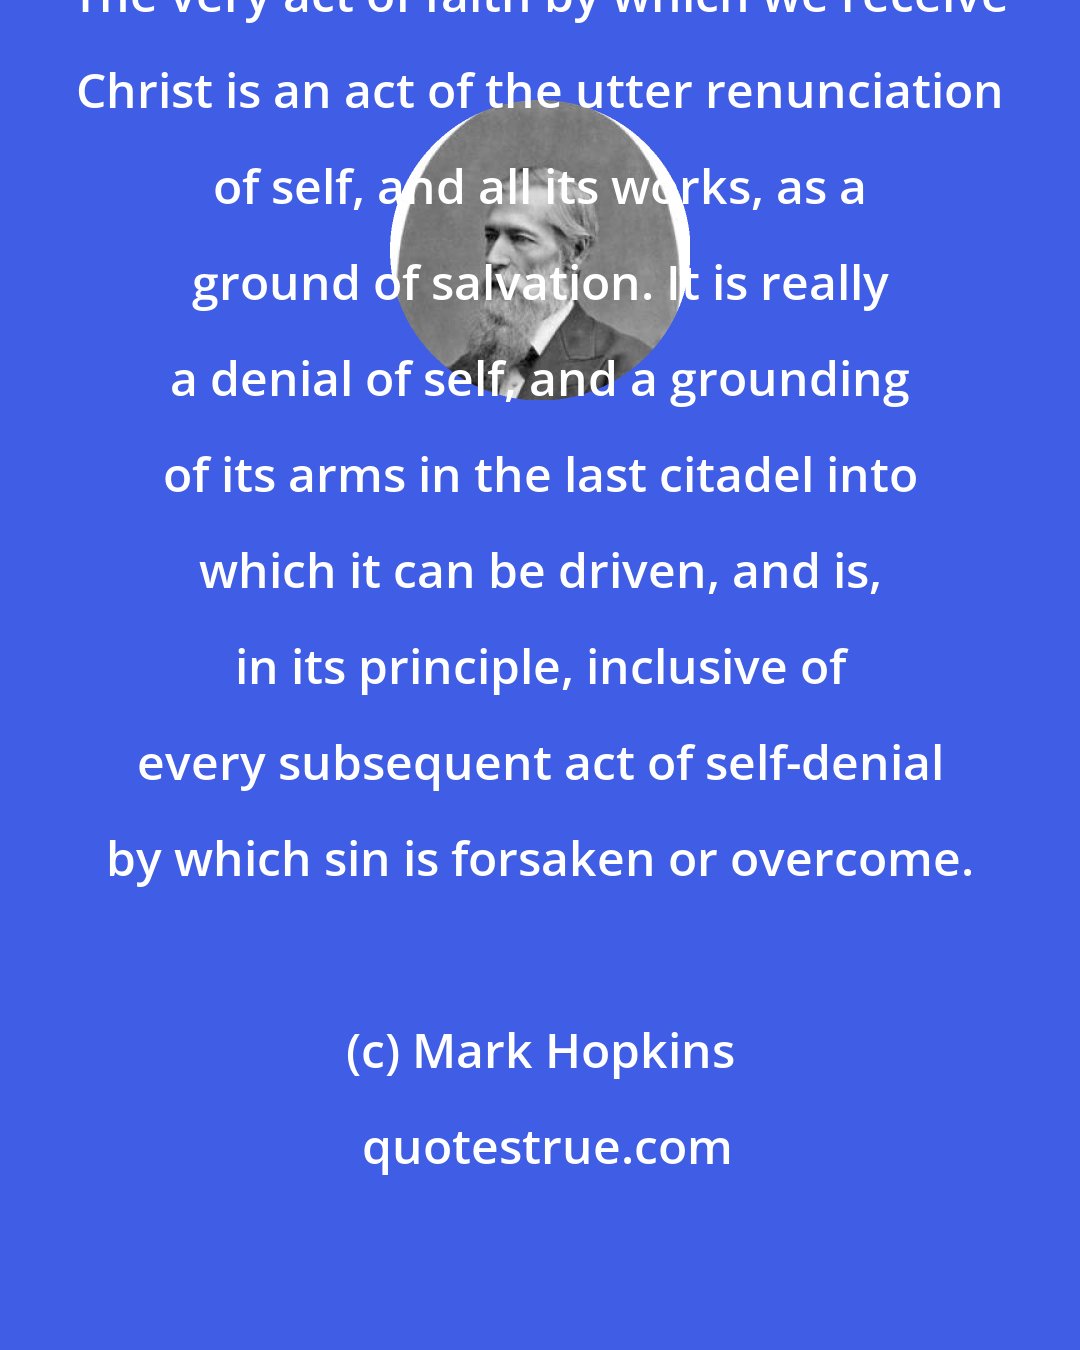 Mark Hopkins: The very act of faith by which we receive Christ is an act of the utter renunciation of self, and all its works, as a ground of salvation. It is really a denial of self, and a grounding of its arms in the last citadel into which it can be driven, and is, in its principle, inclusive of every subsequent act of self-denial by which sin is forsaken or overcome.